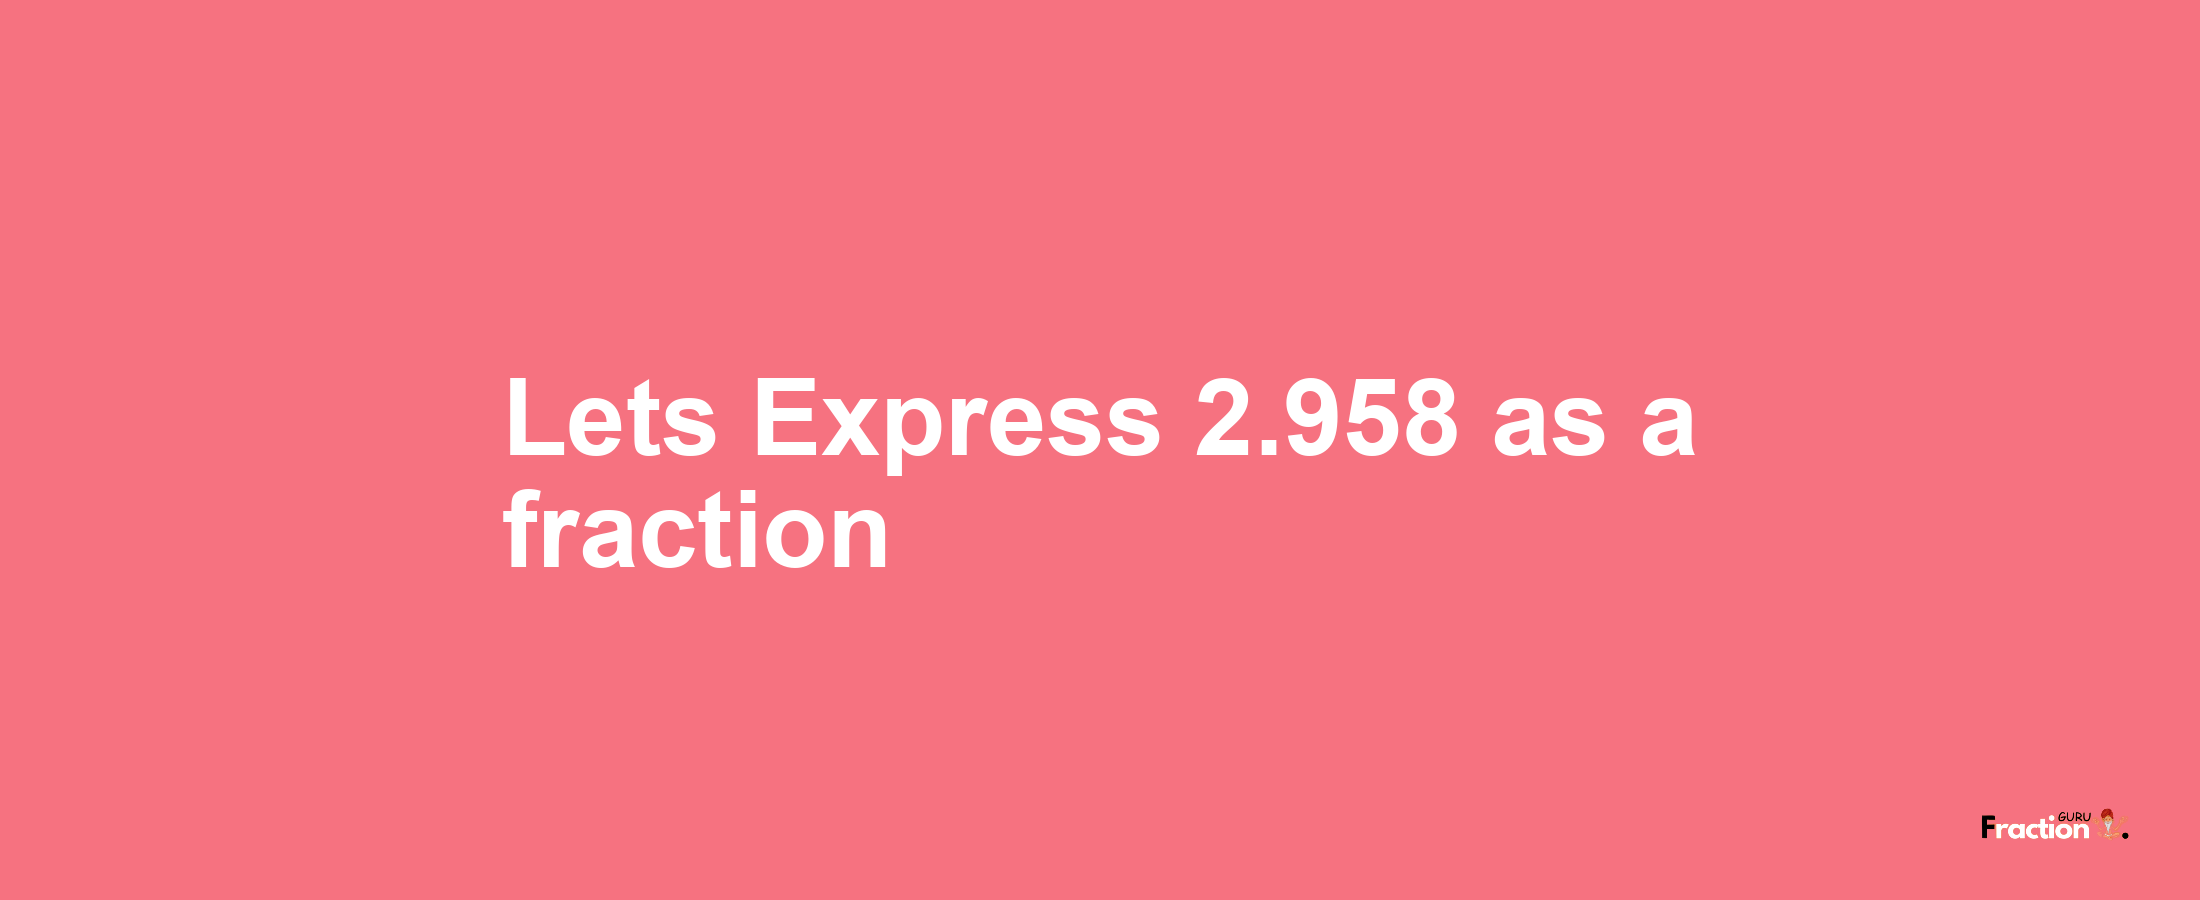 Lets Express 2.958 as afraction